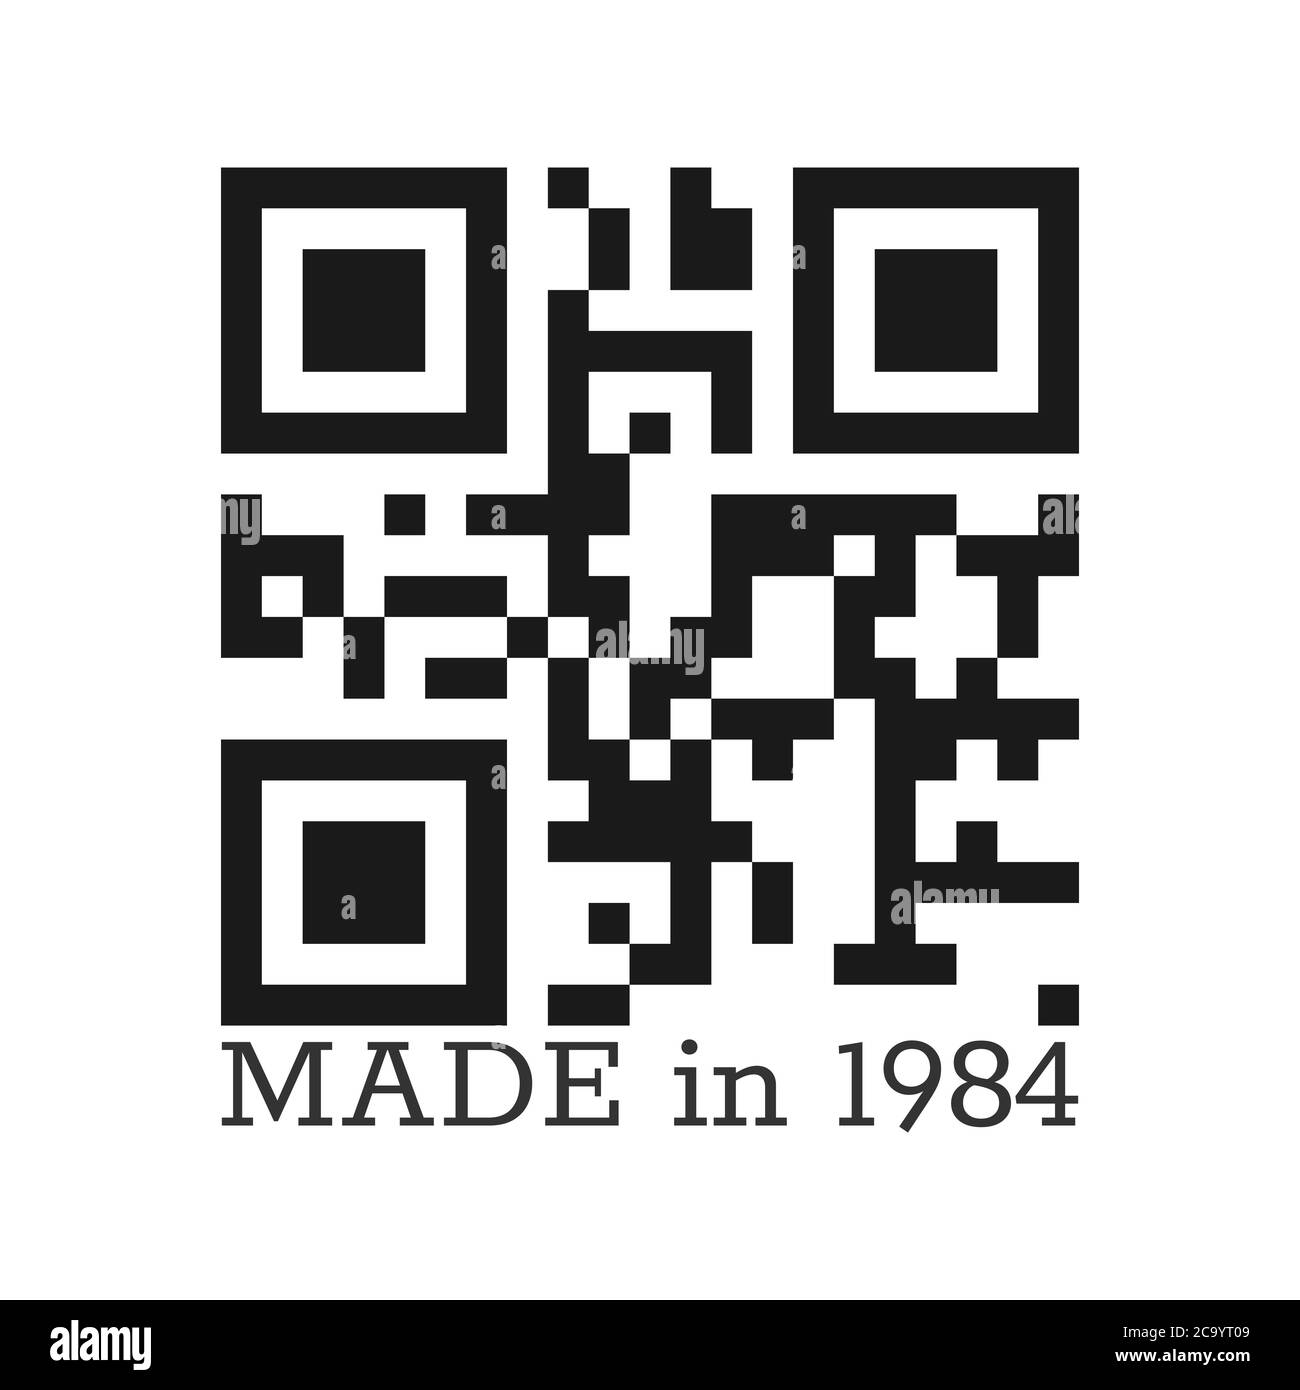 Made in 1984. Vector stylized lettering with a real QR code. Vector illustration for clothing, textiles and greetings isolated on a white background. Stock Vector